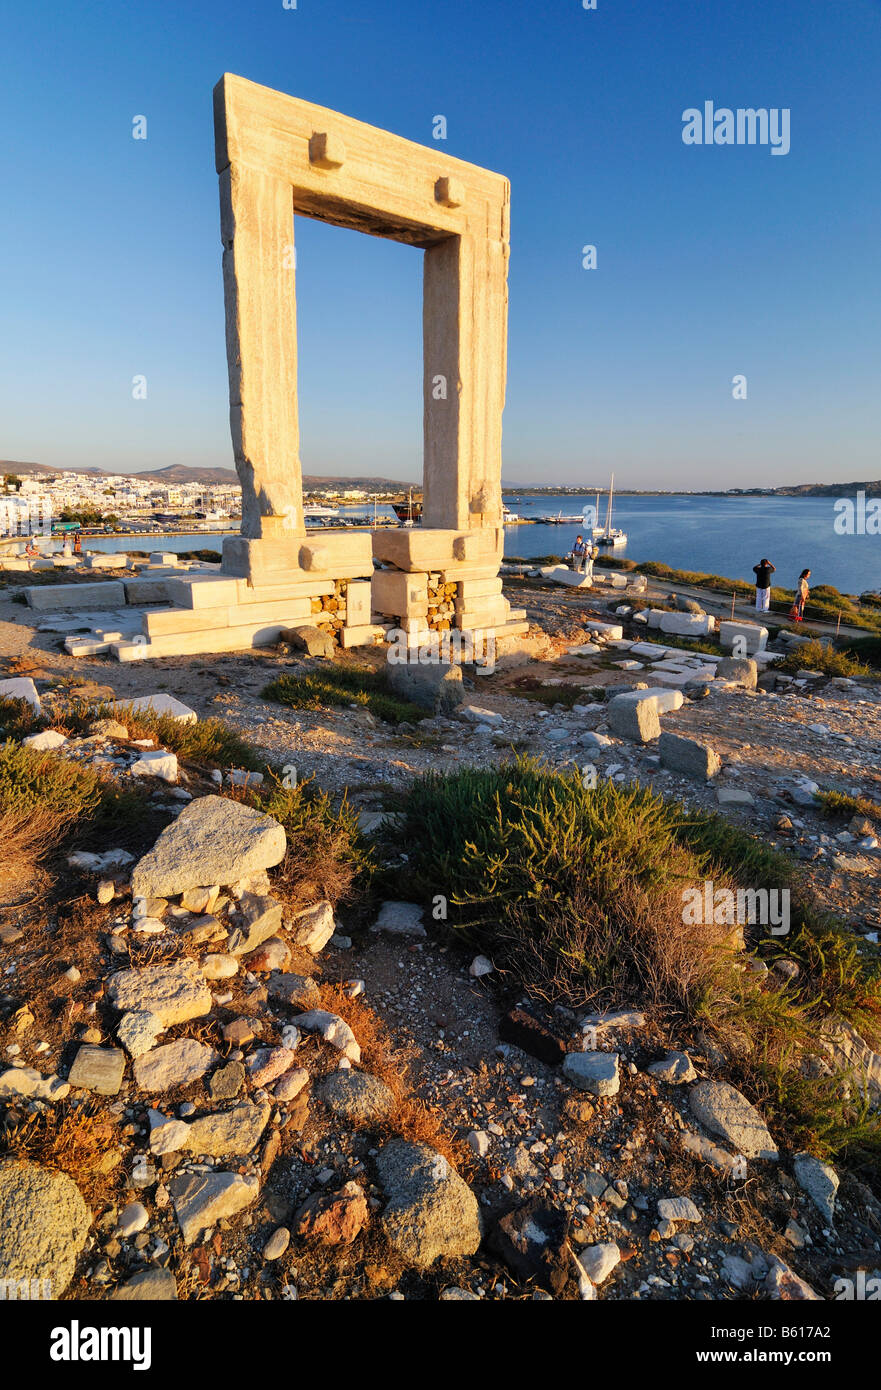 Gateway to antiquity, giant door or Portara of the Temple of Apollo at the town of Naxos, Cyclades Island Group, Greece, Europe Stock Photo